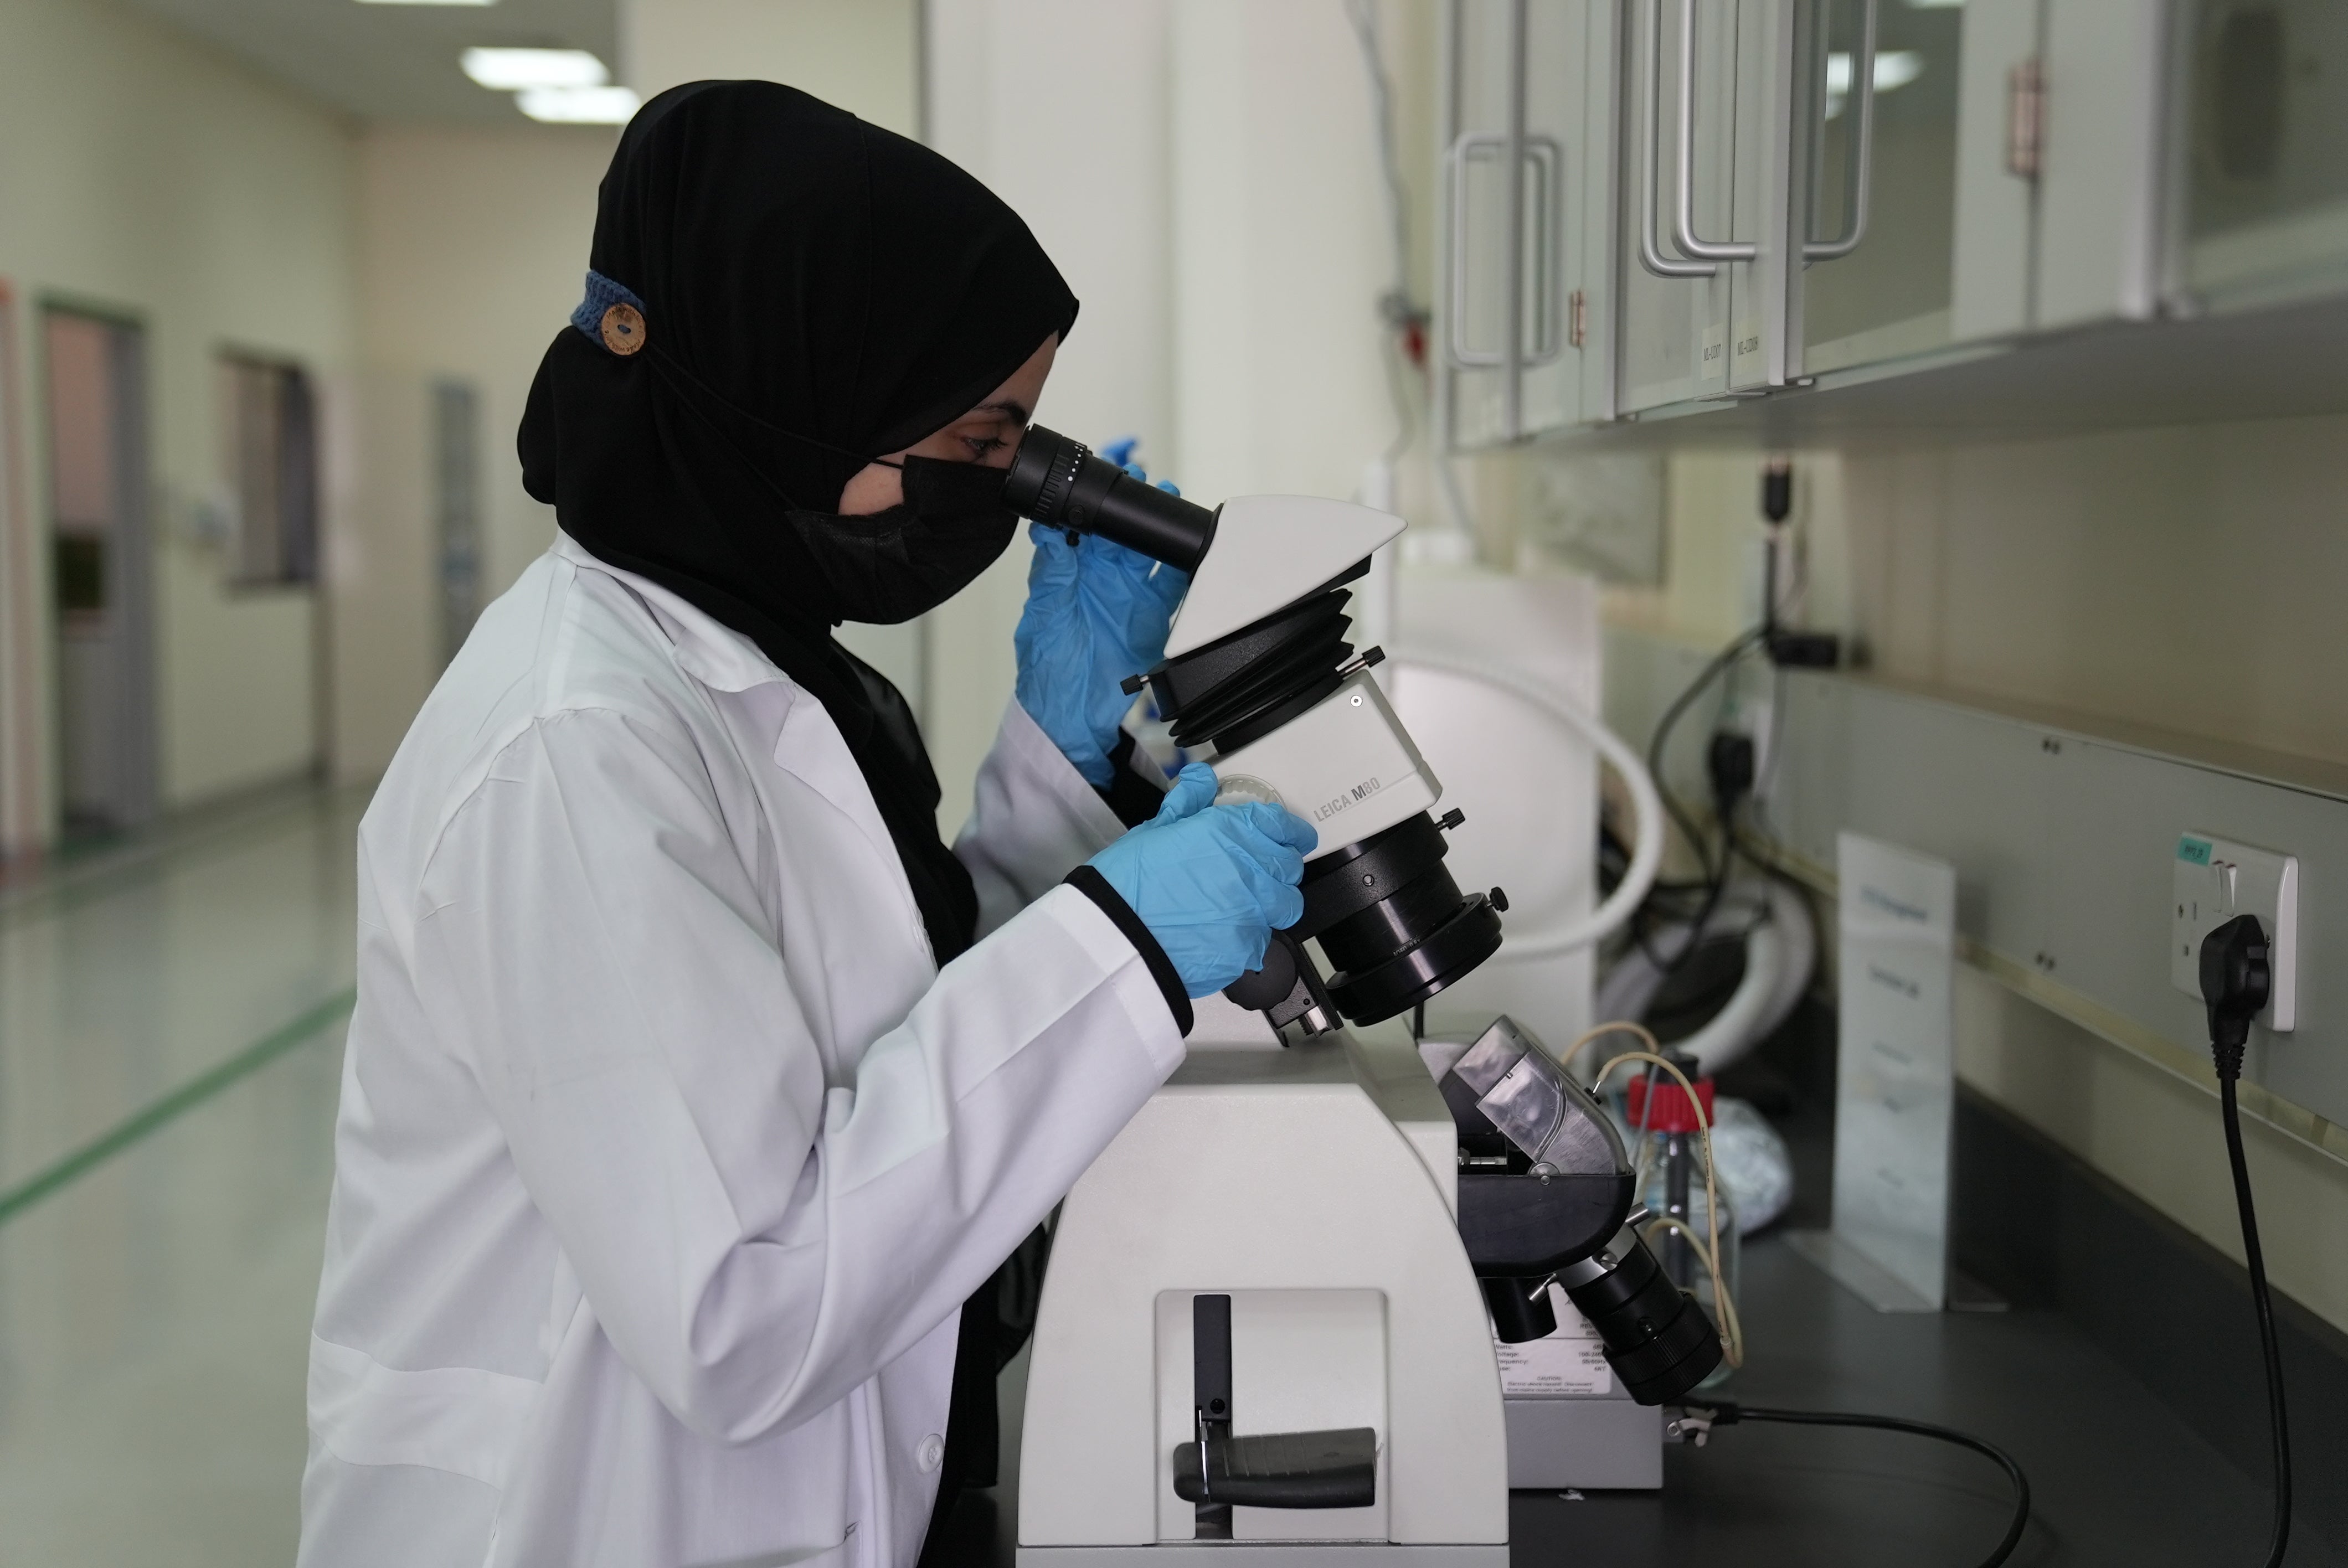 Researcher working at the Desalination Technology Research Institute (DTRI)